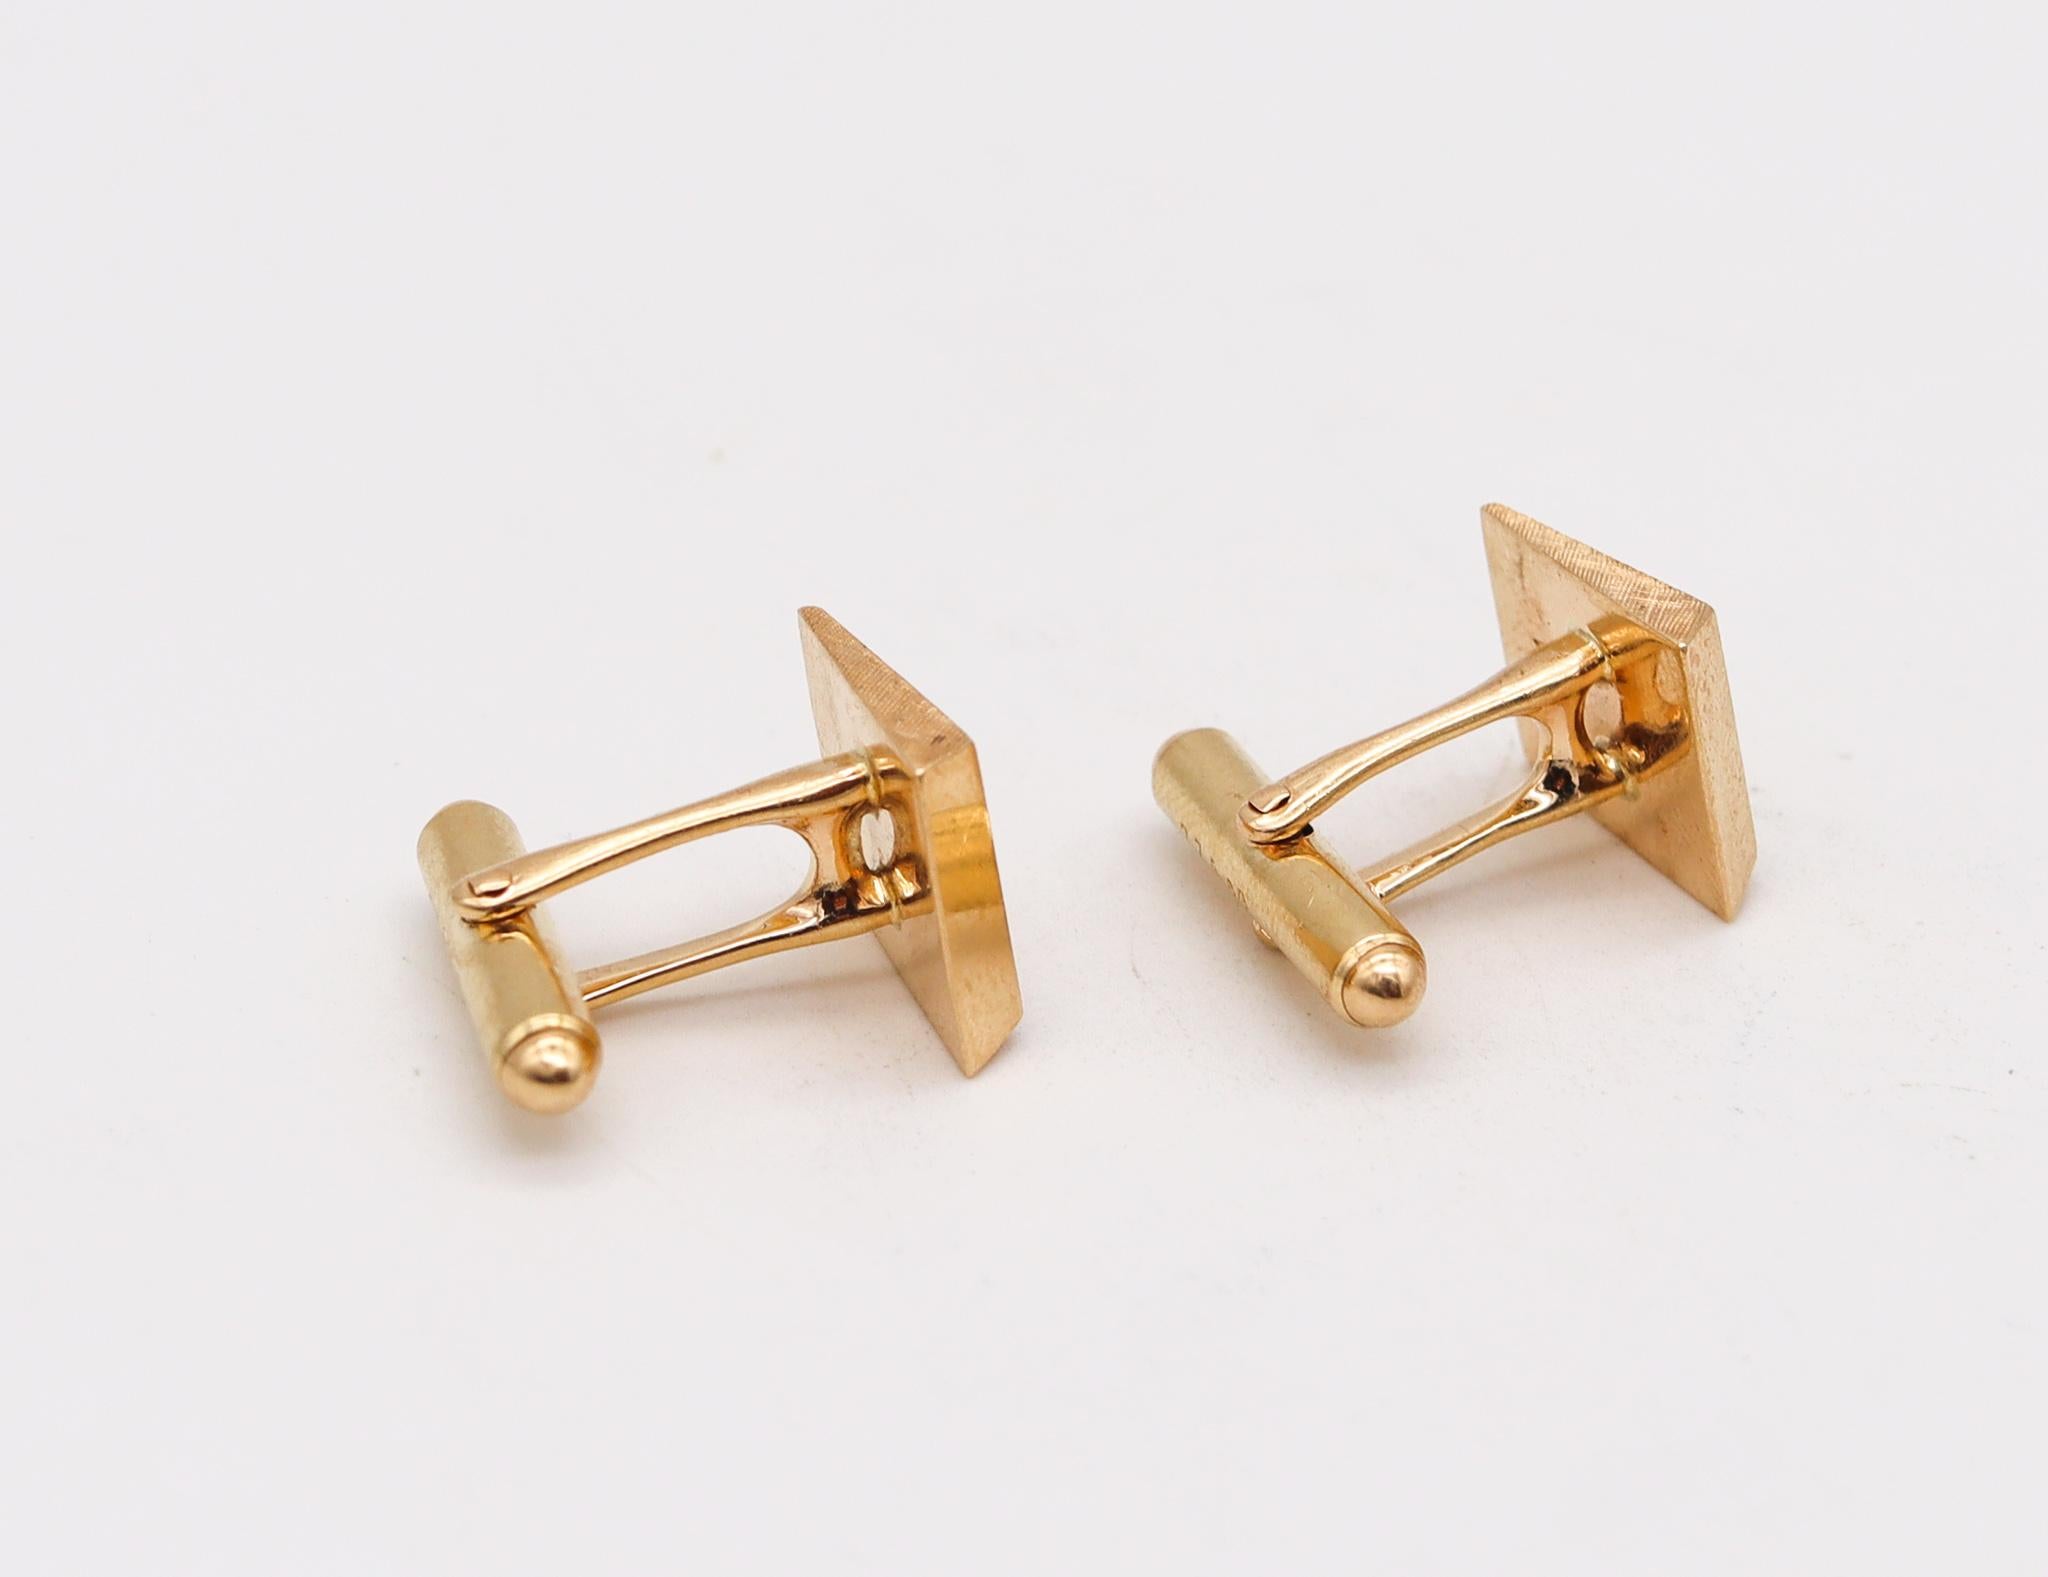 Cartier 1970 Retro Modernist Geometric Pair of Cufflinks in Brushed 14kt Gold In Excellent Condition For Sale In Miami, FL